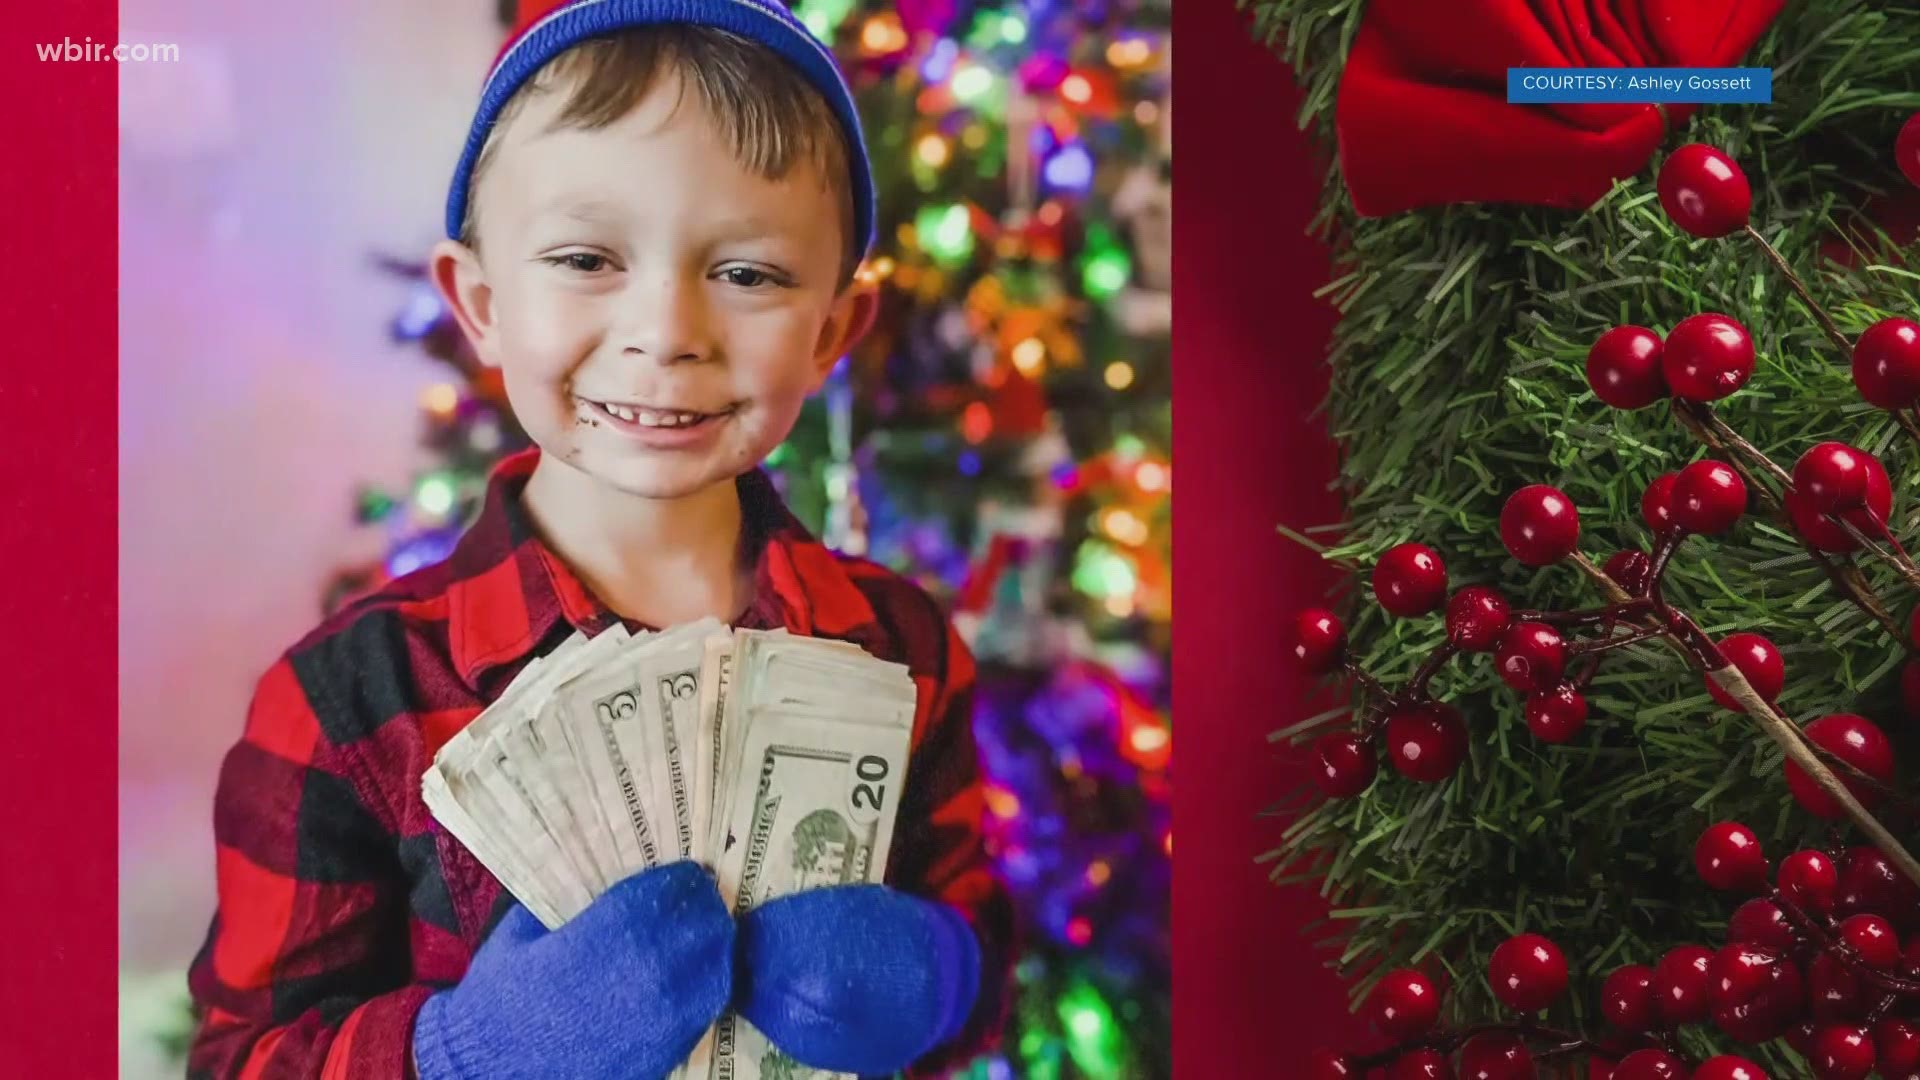 A 5-year-old Seymour boy who was recently adopted out of the foster care system wanted to use his earnings to buy Christmas gifts for kids in need.